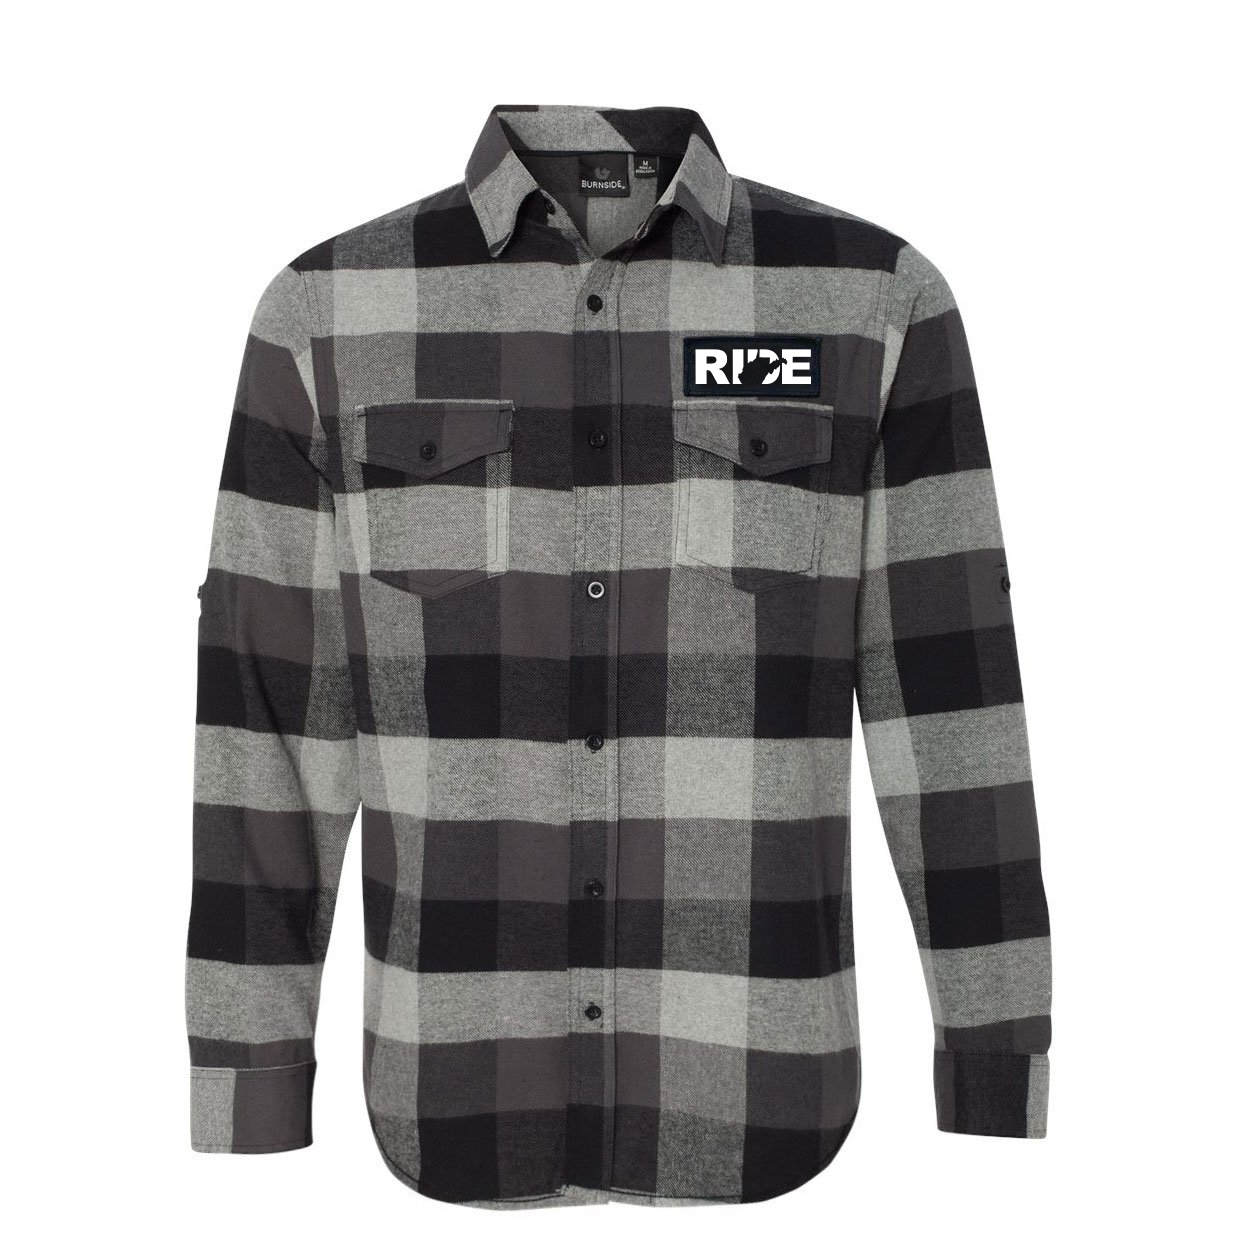 Ride West Virginia Classic Unisex Long Sleeve Woven Patch Flannel Shirt Black/Gray (White Logo)